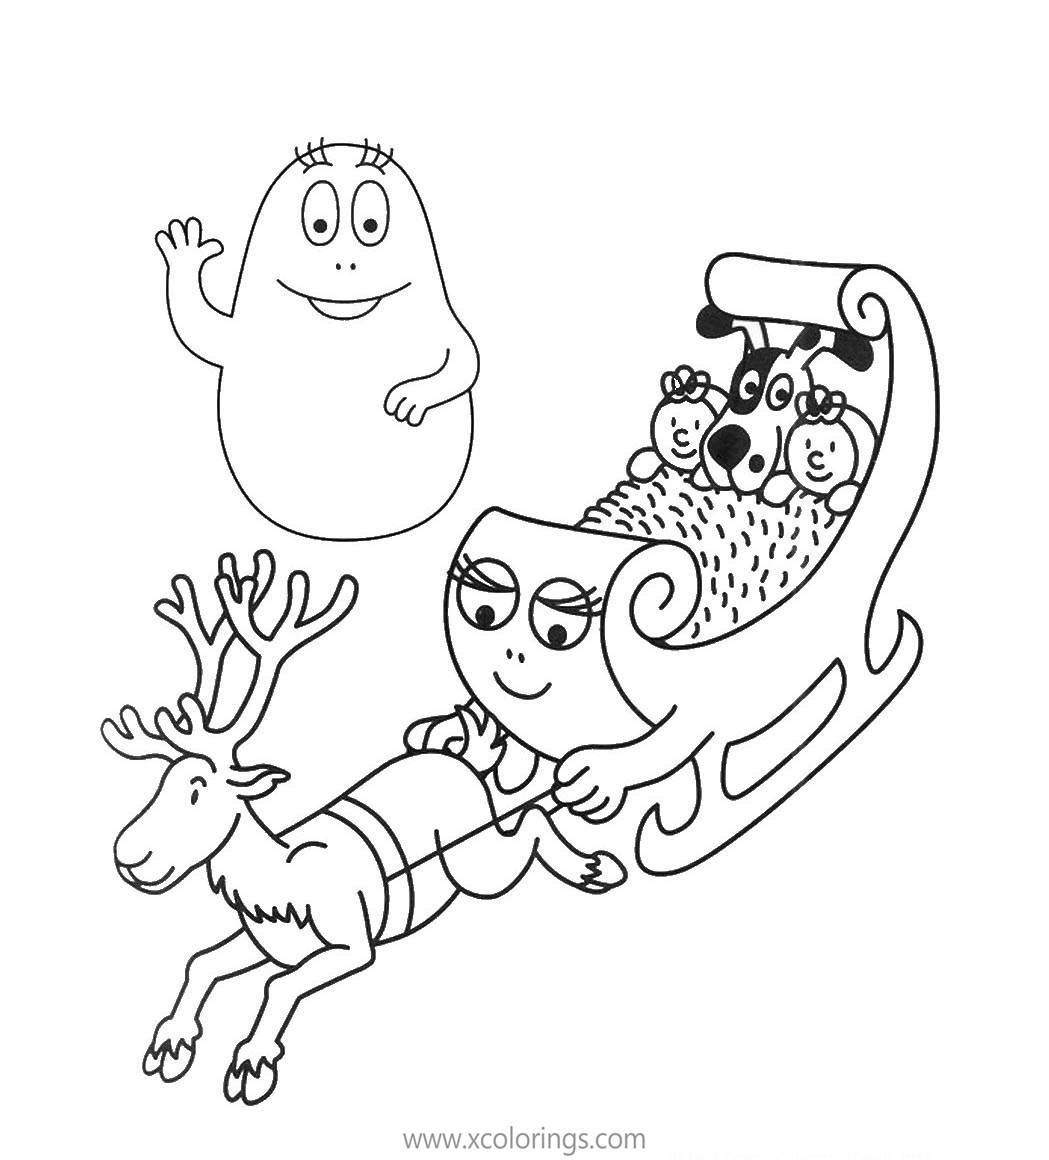 Free Barbapapa Coloring Pages Dog in the Sleigh printable